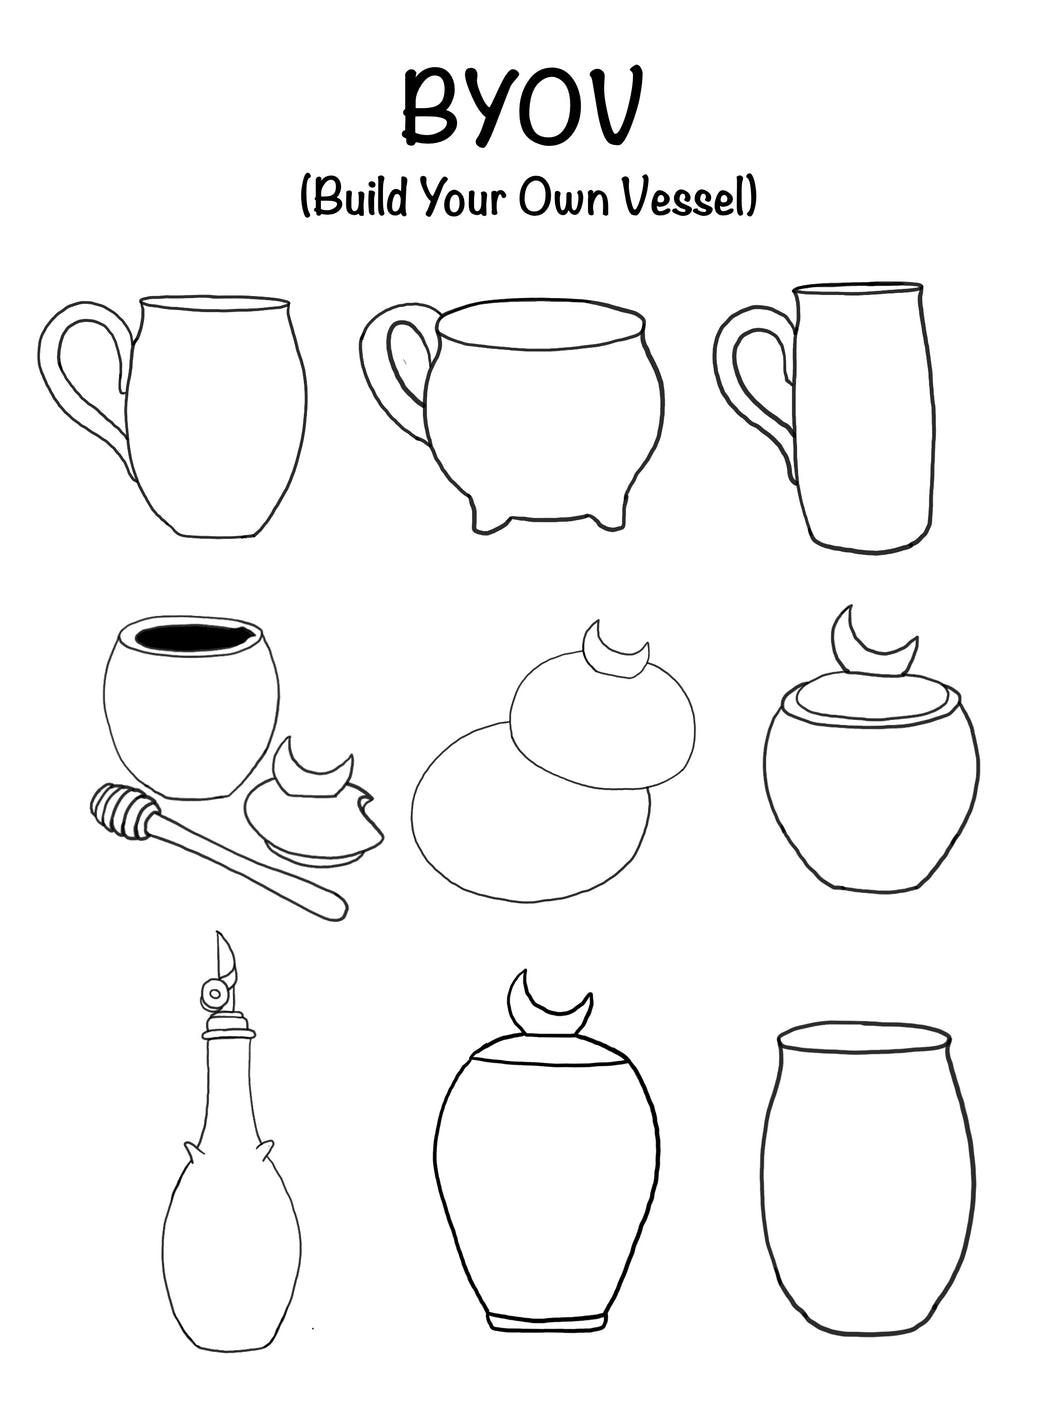 Build Your Own Vessel